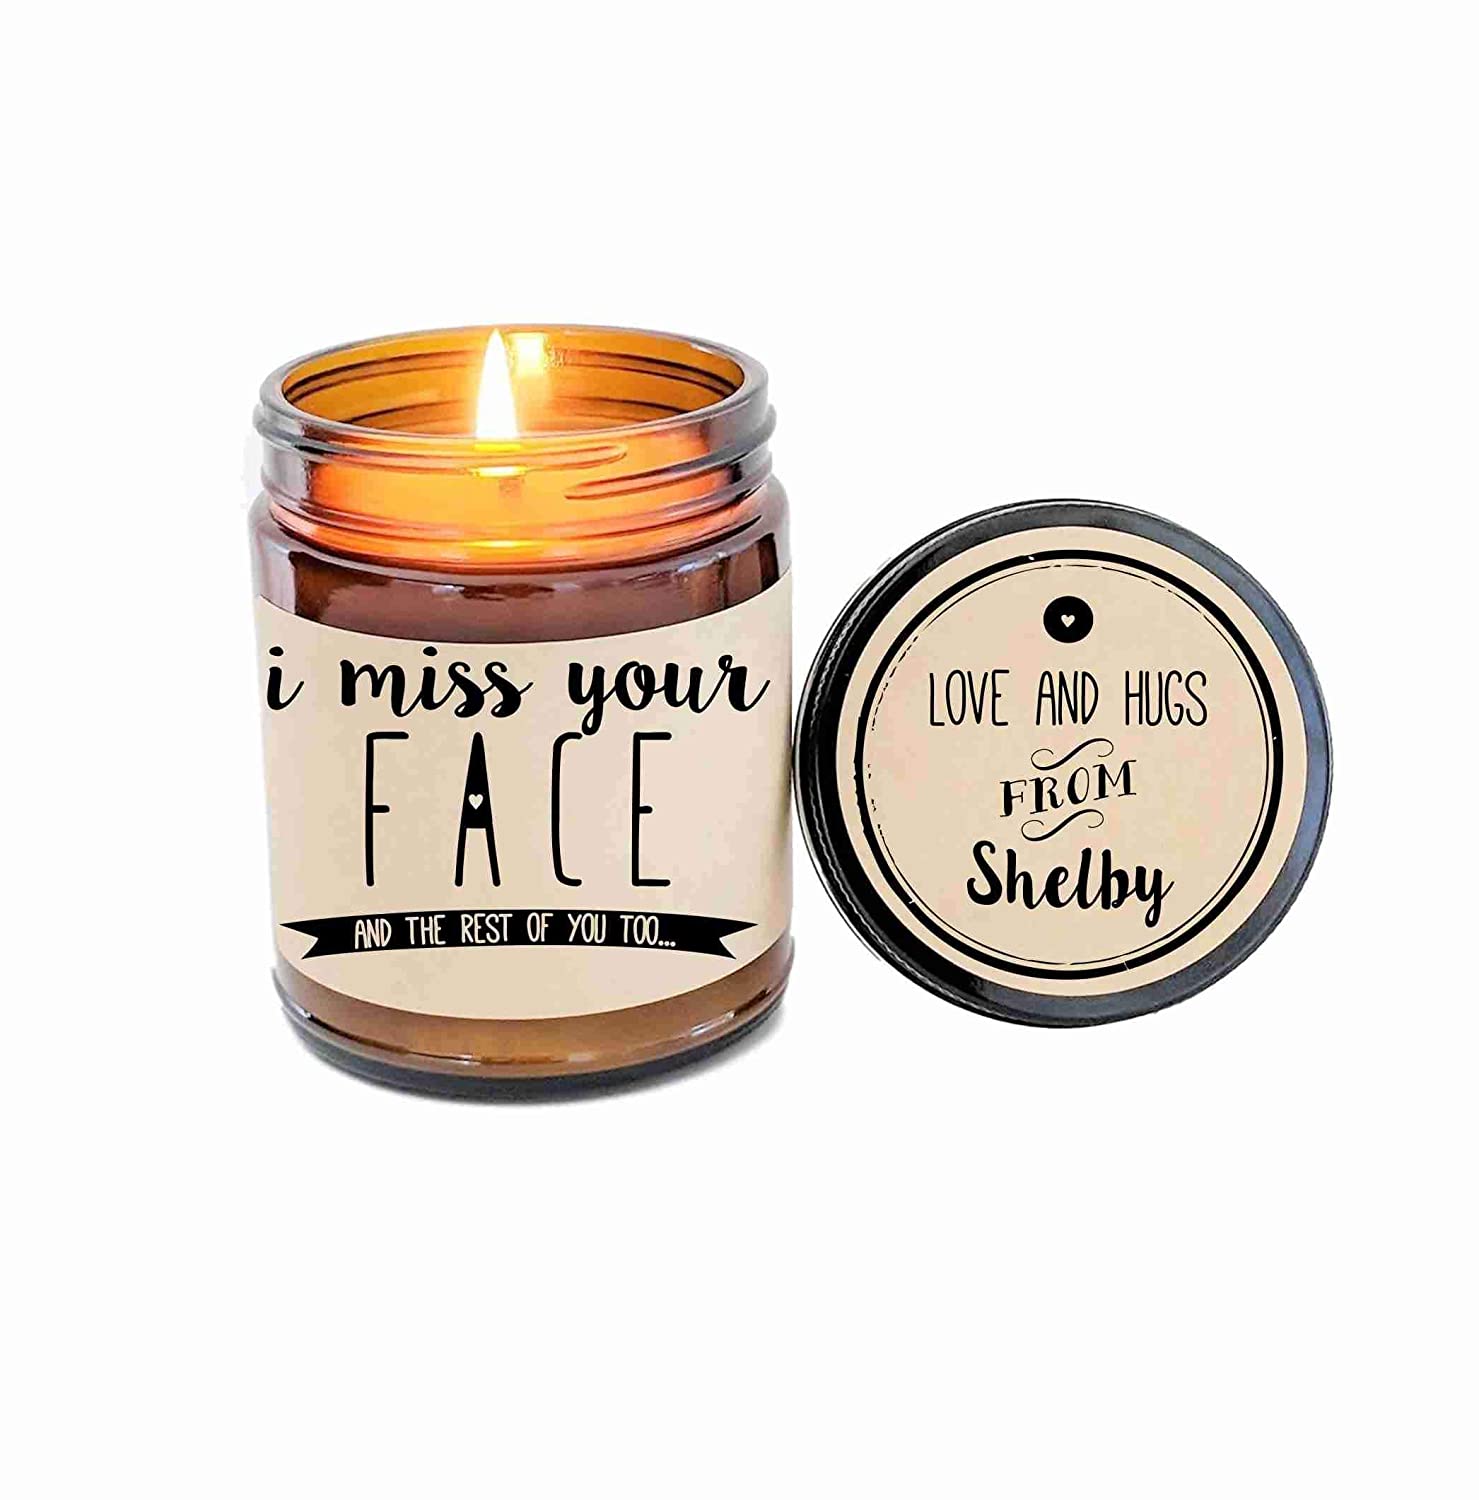 long-distance-relationship-gifts-candle